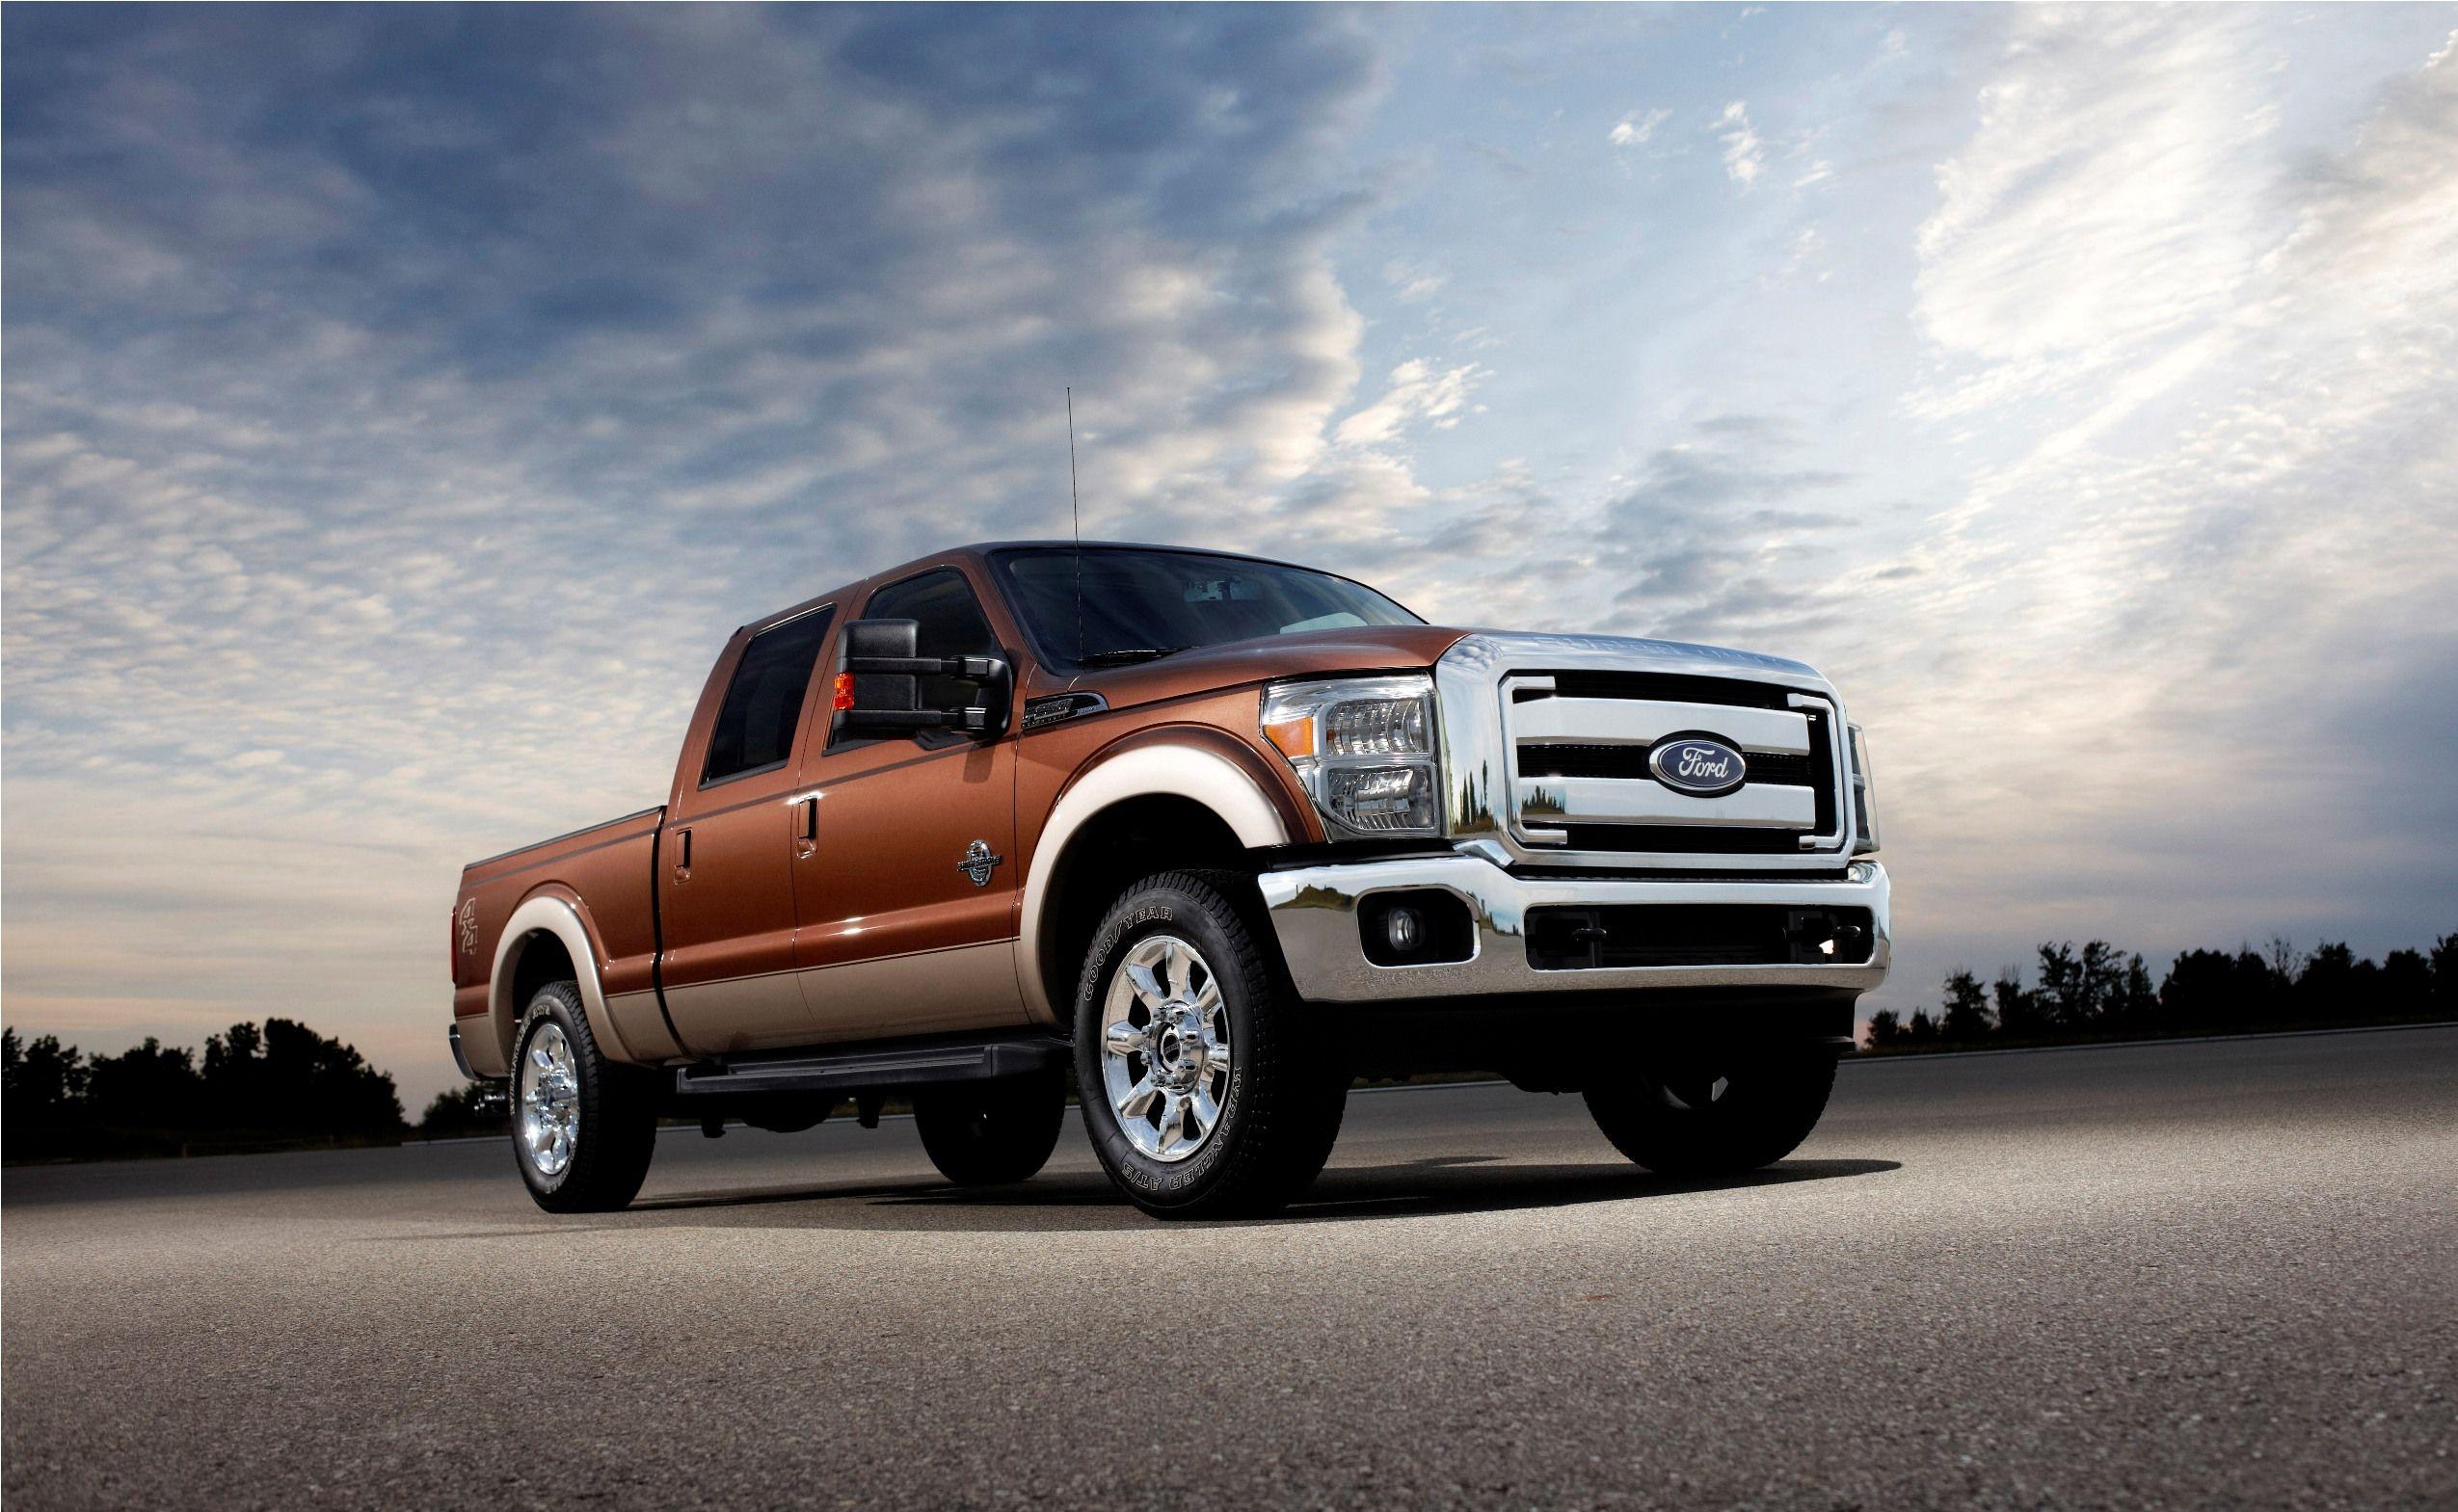 Ford Truck Wallpapers - Top Free Ford